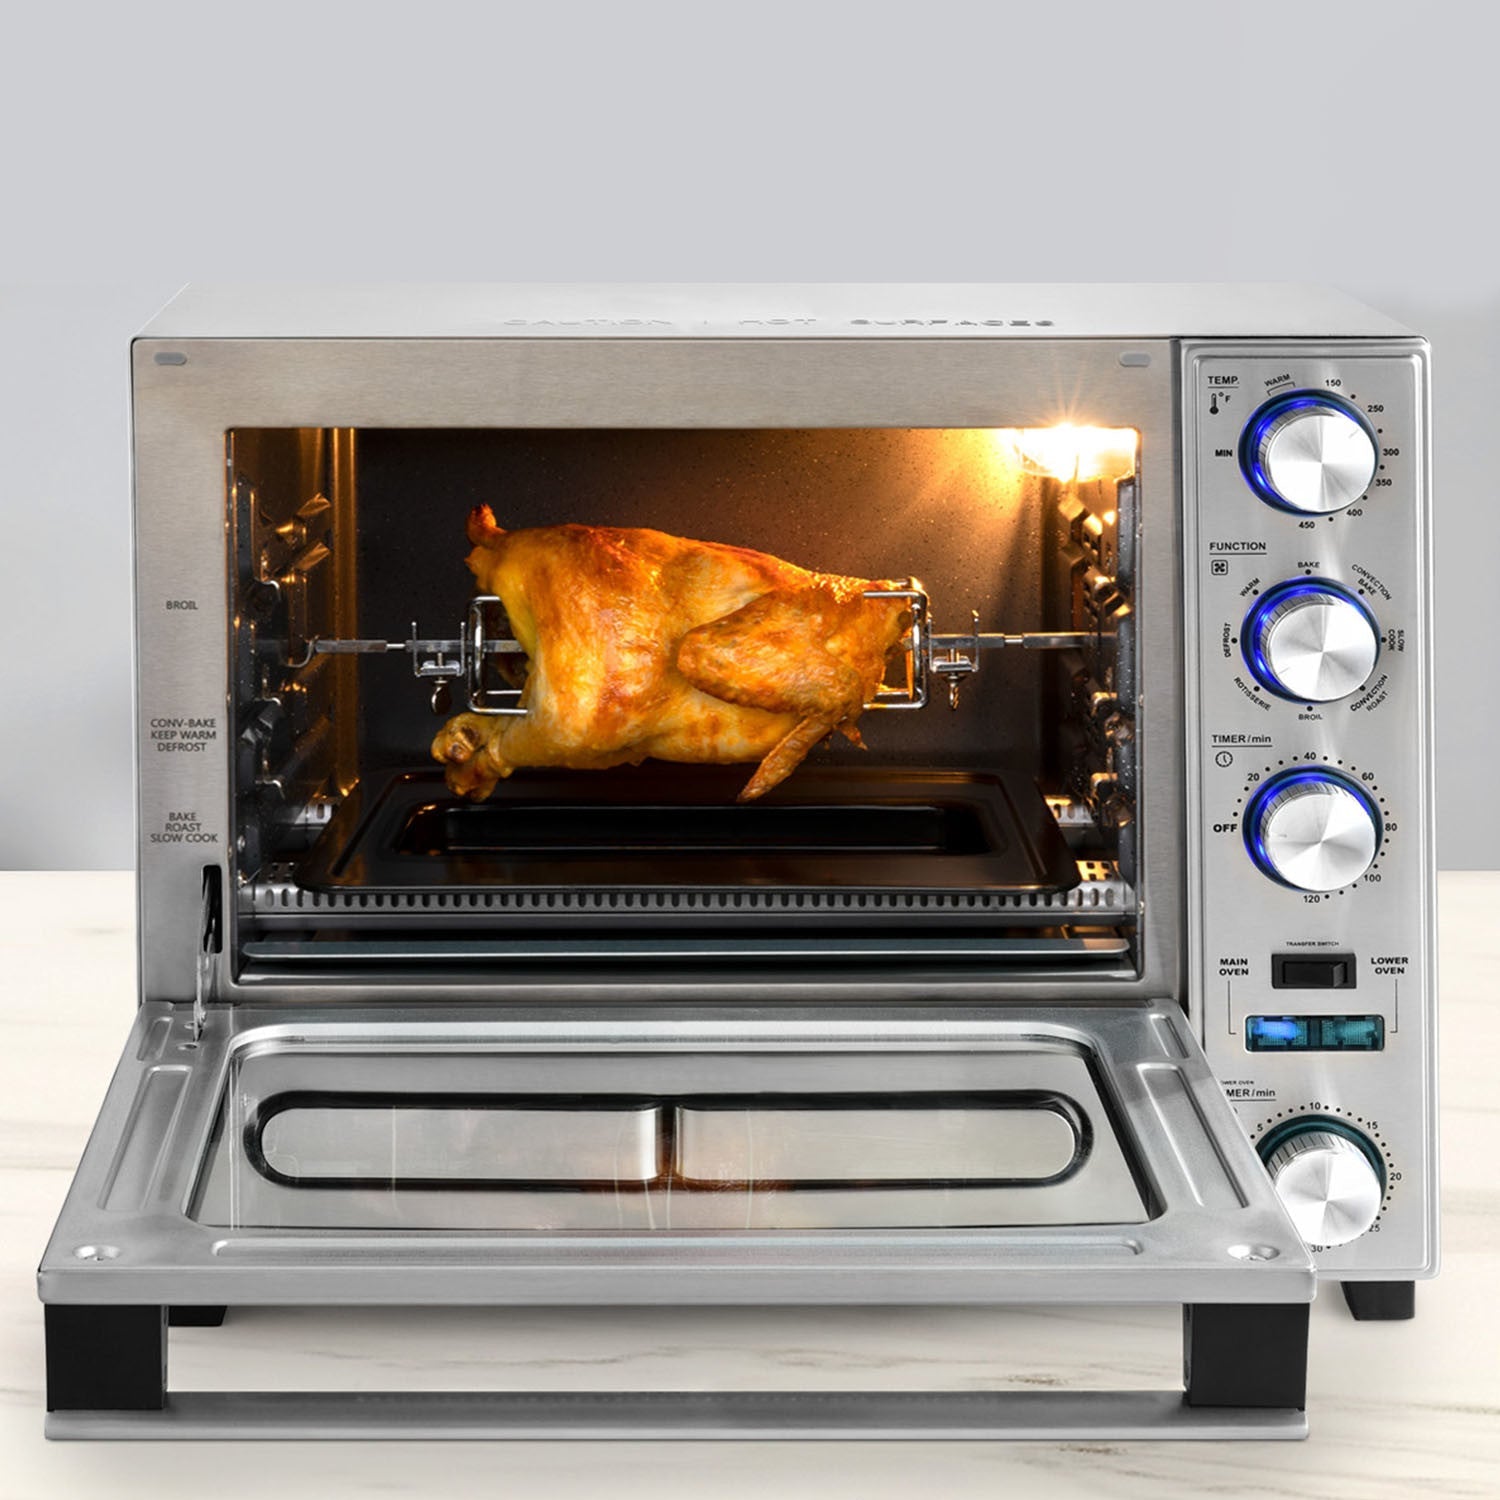 Professional Grade Convection Oven with Built-In Rotisserie & Pizza Drawer